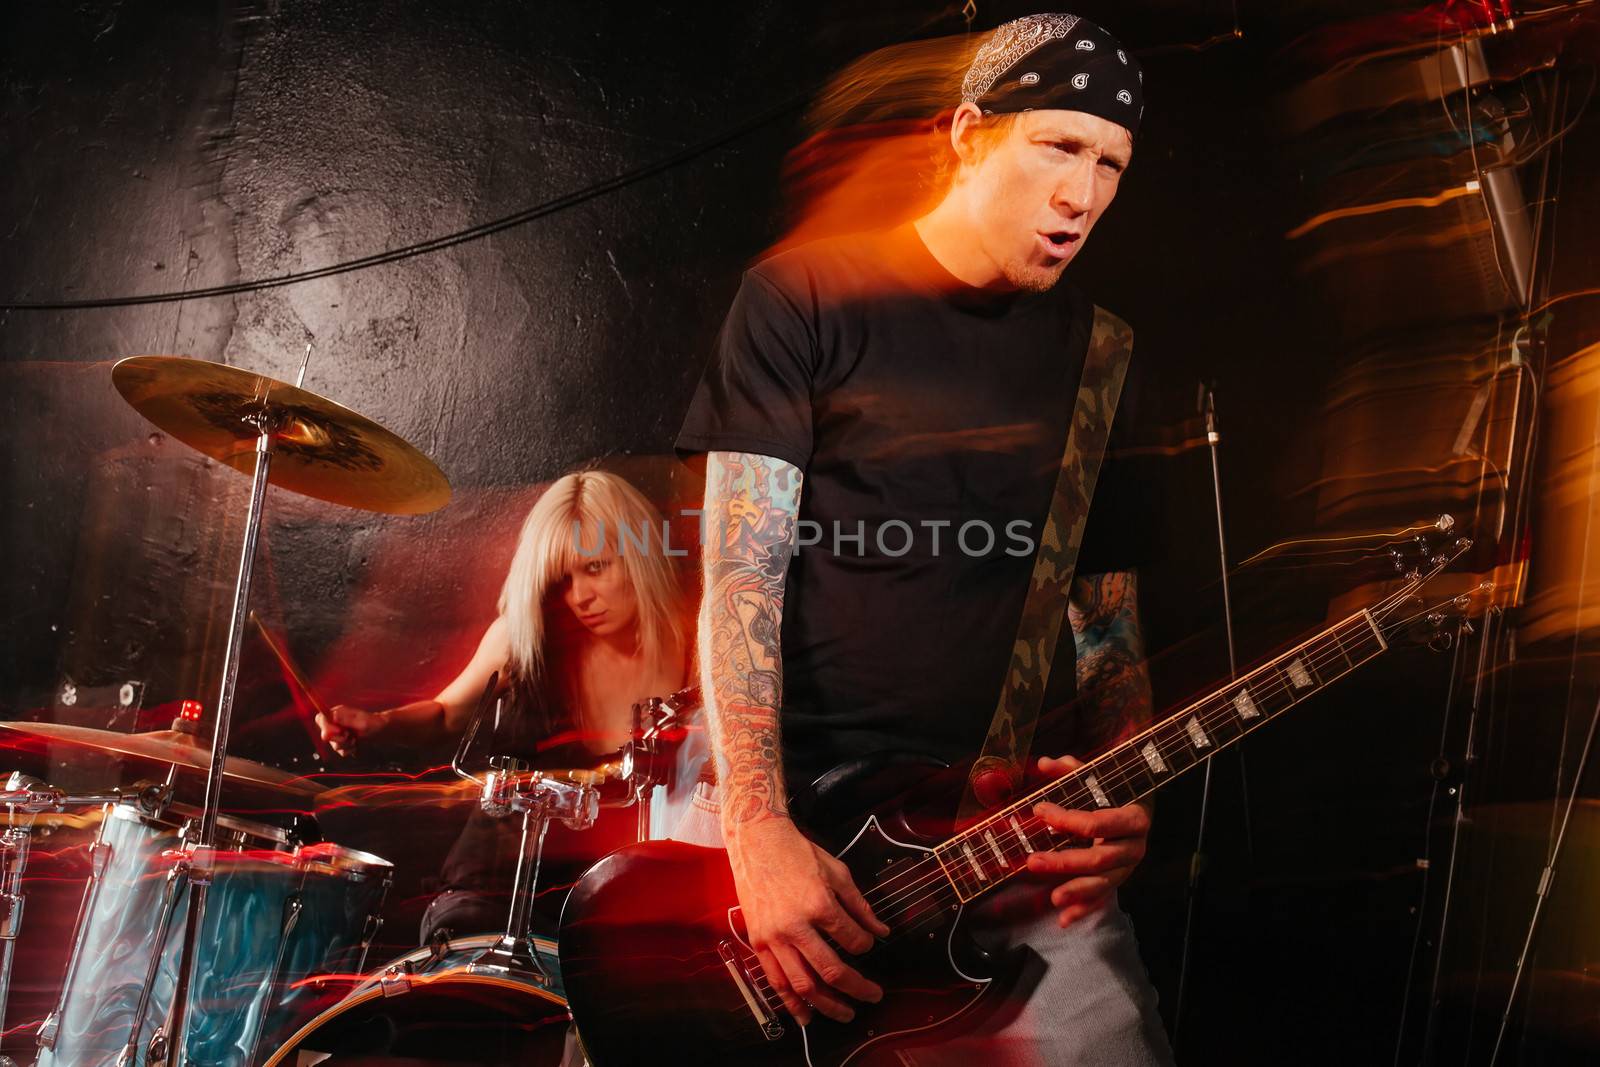 Band playing on a stage. Male guitarist and female drummer. Shot with strobes and slow shutter speed to create lighting atmosphere and blur effects. Slight motion blur on performers.